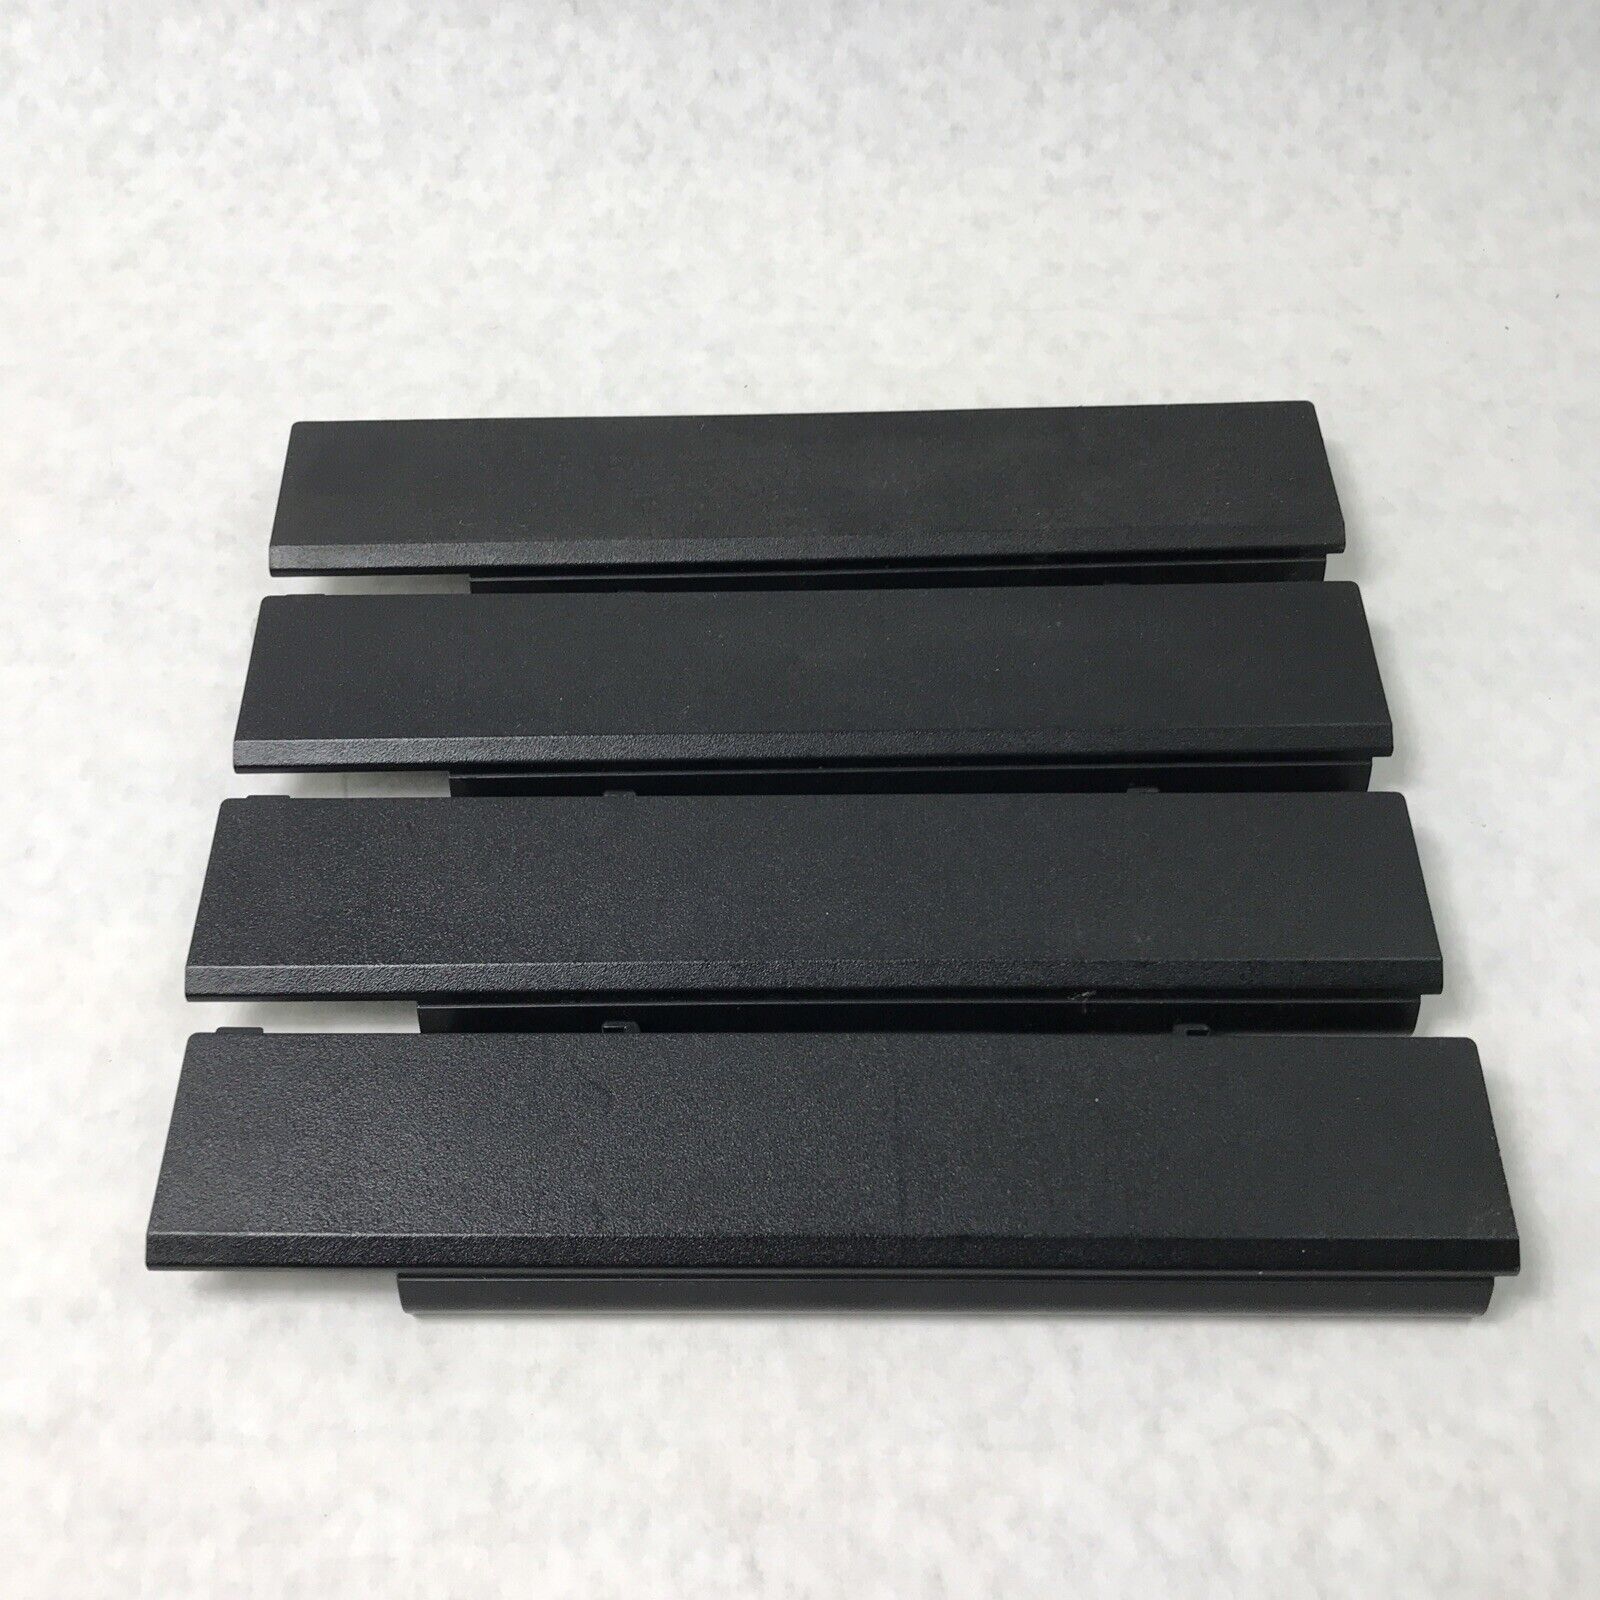 (Lot of 4) Genuine Dell TY3P4 11.1V Laptop Battery Rechargeable Li-ion Battery